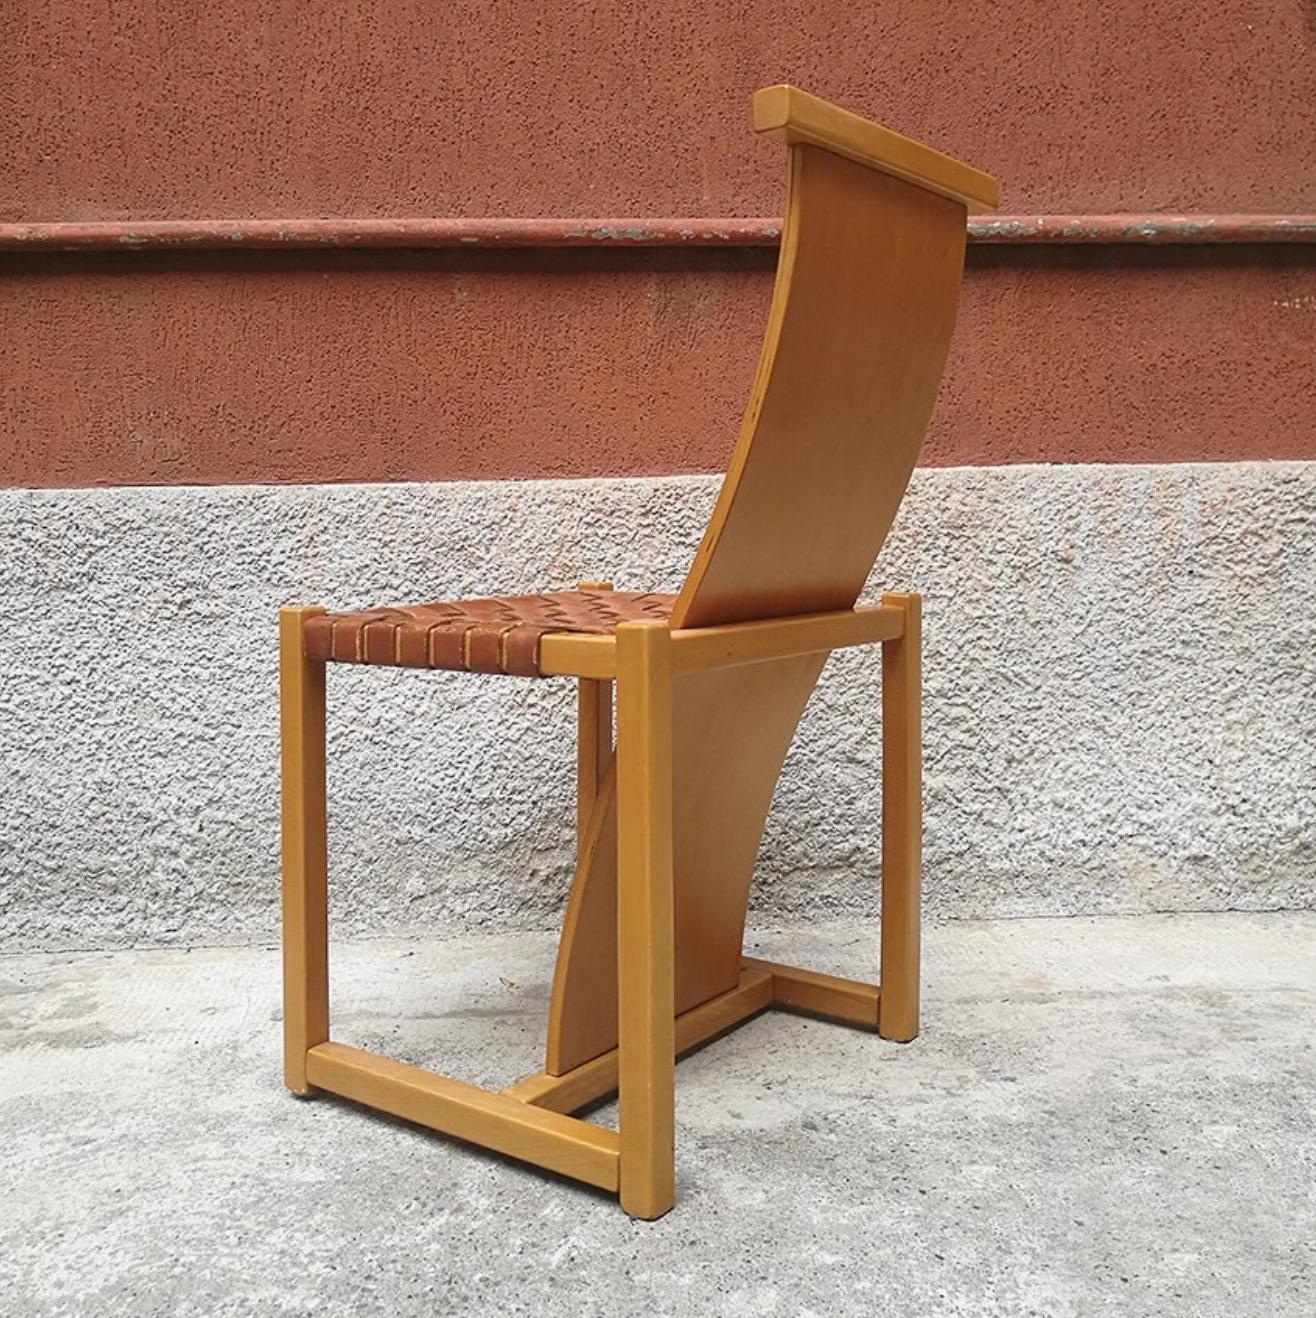 Italian interwined leather and beech chair from 1980s
Rare Italian chair in beech, with a cognac interwined leather as a seating.
Structure in solid wood, with backrest and seat in curved beech plywood.
This set is in perfect original conditions